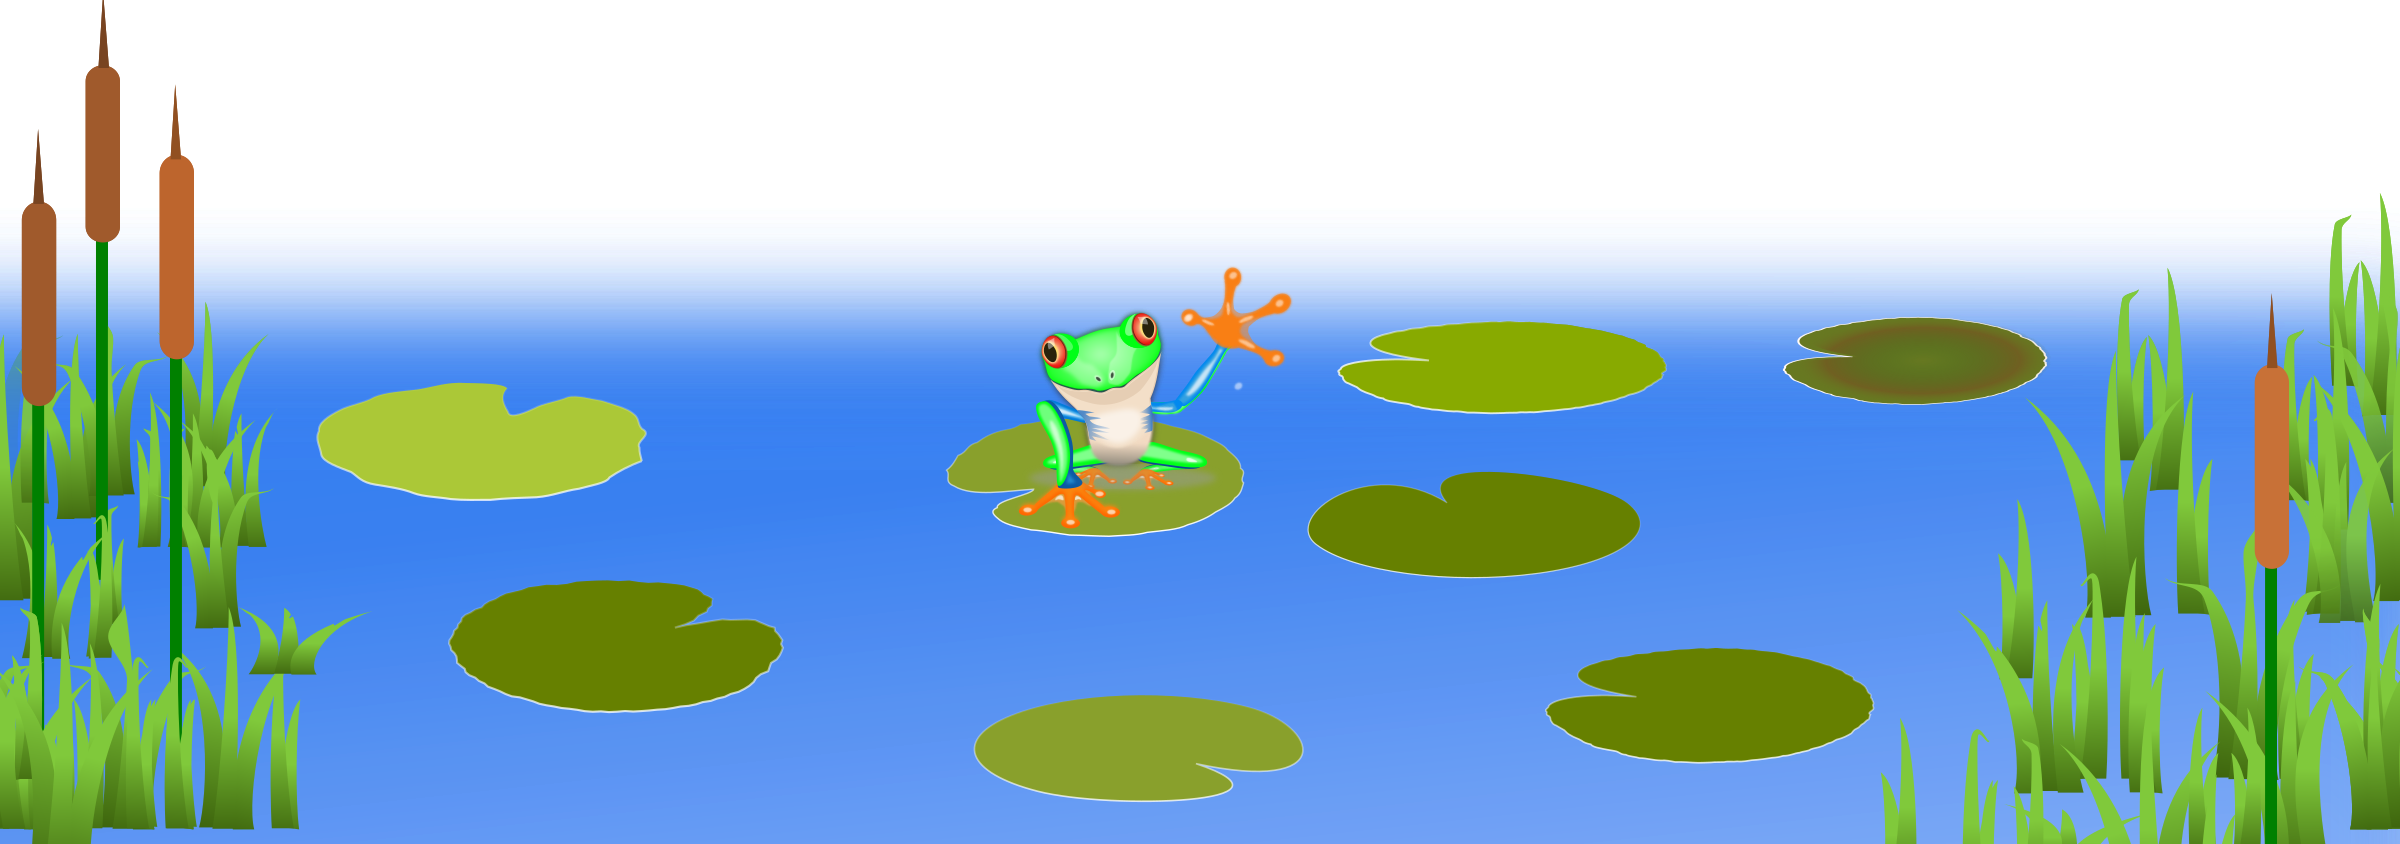 Swamp clipart free download on WebStockReview